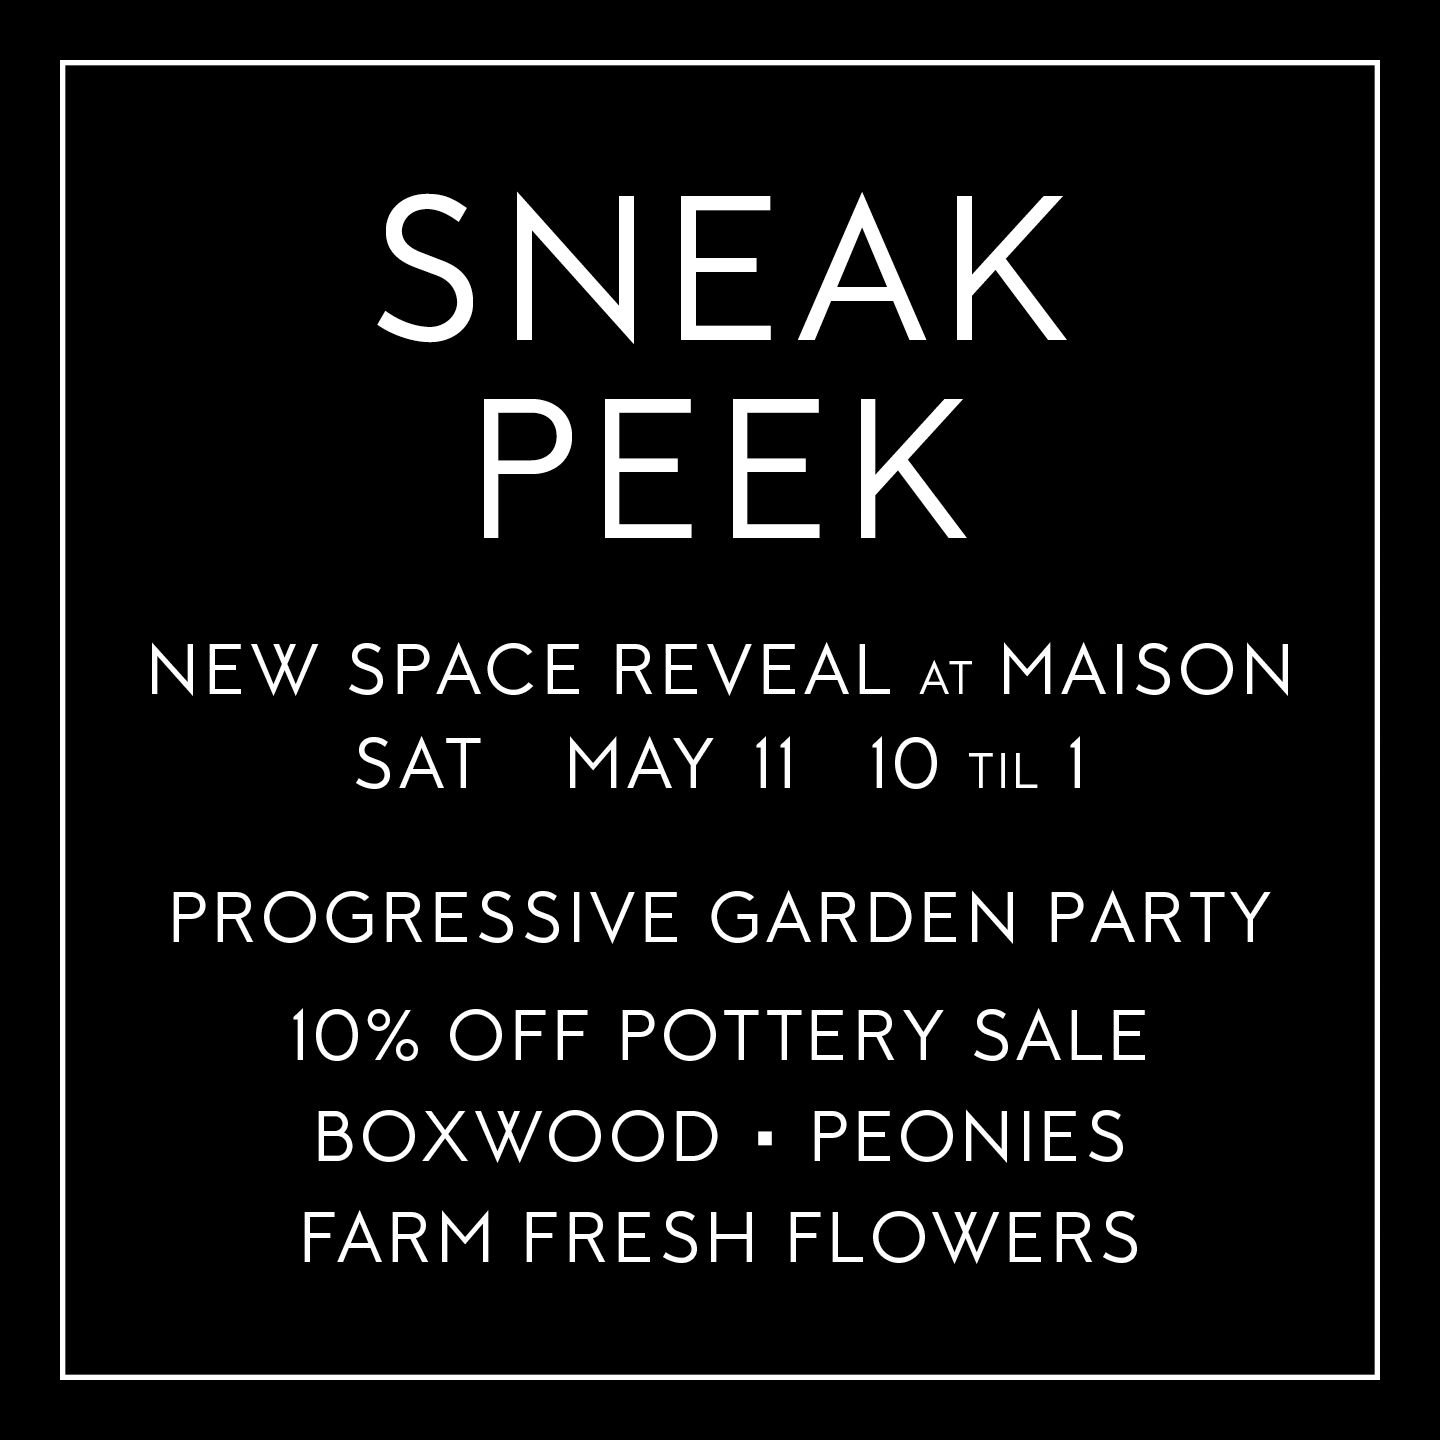 We're so damn excited to share with you what we've been up to in Nw.

Let's do a little progressive garden party celebrating Mom love. We're doing a window this week to unveil the vision for that space. Gotta head over to see what's happening 

Potte